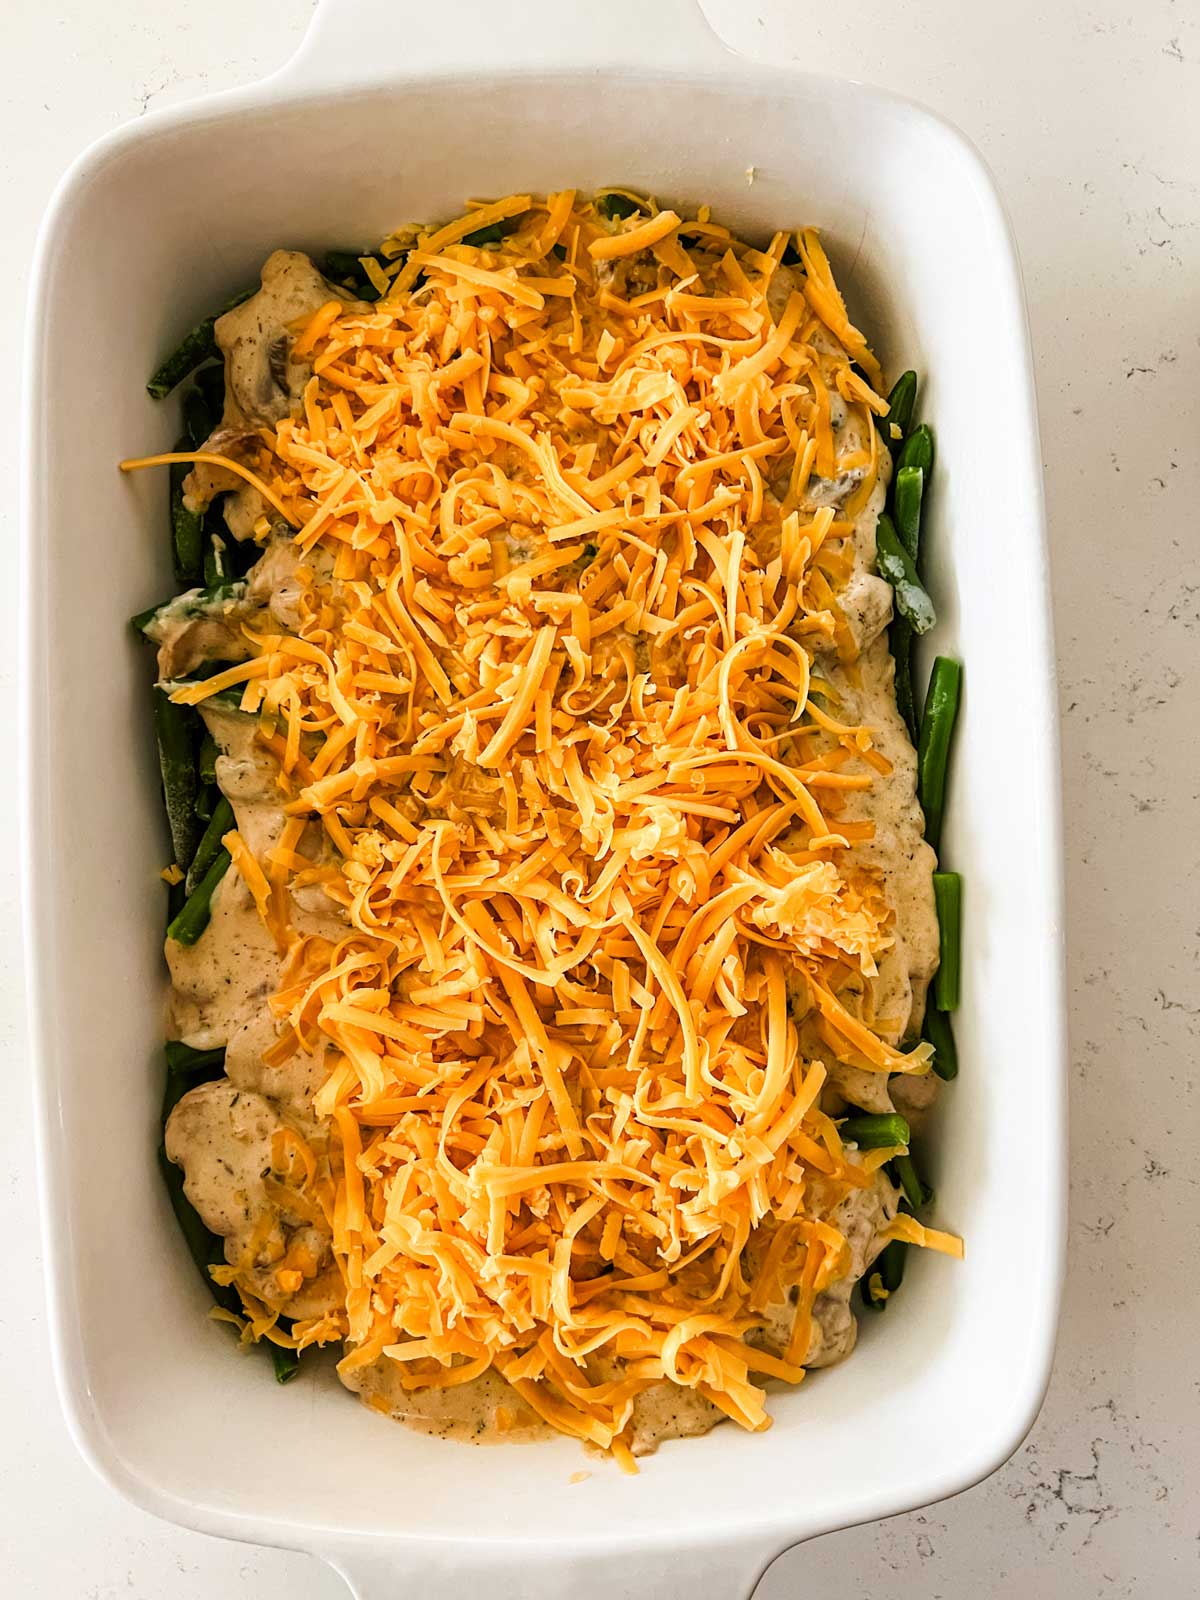 Green bean casserole with cheddar cheese on top of it ready for the oven.